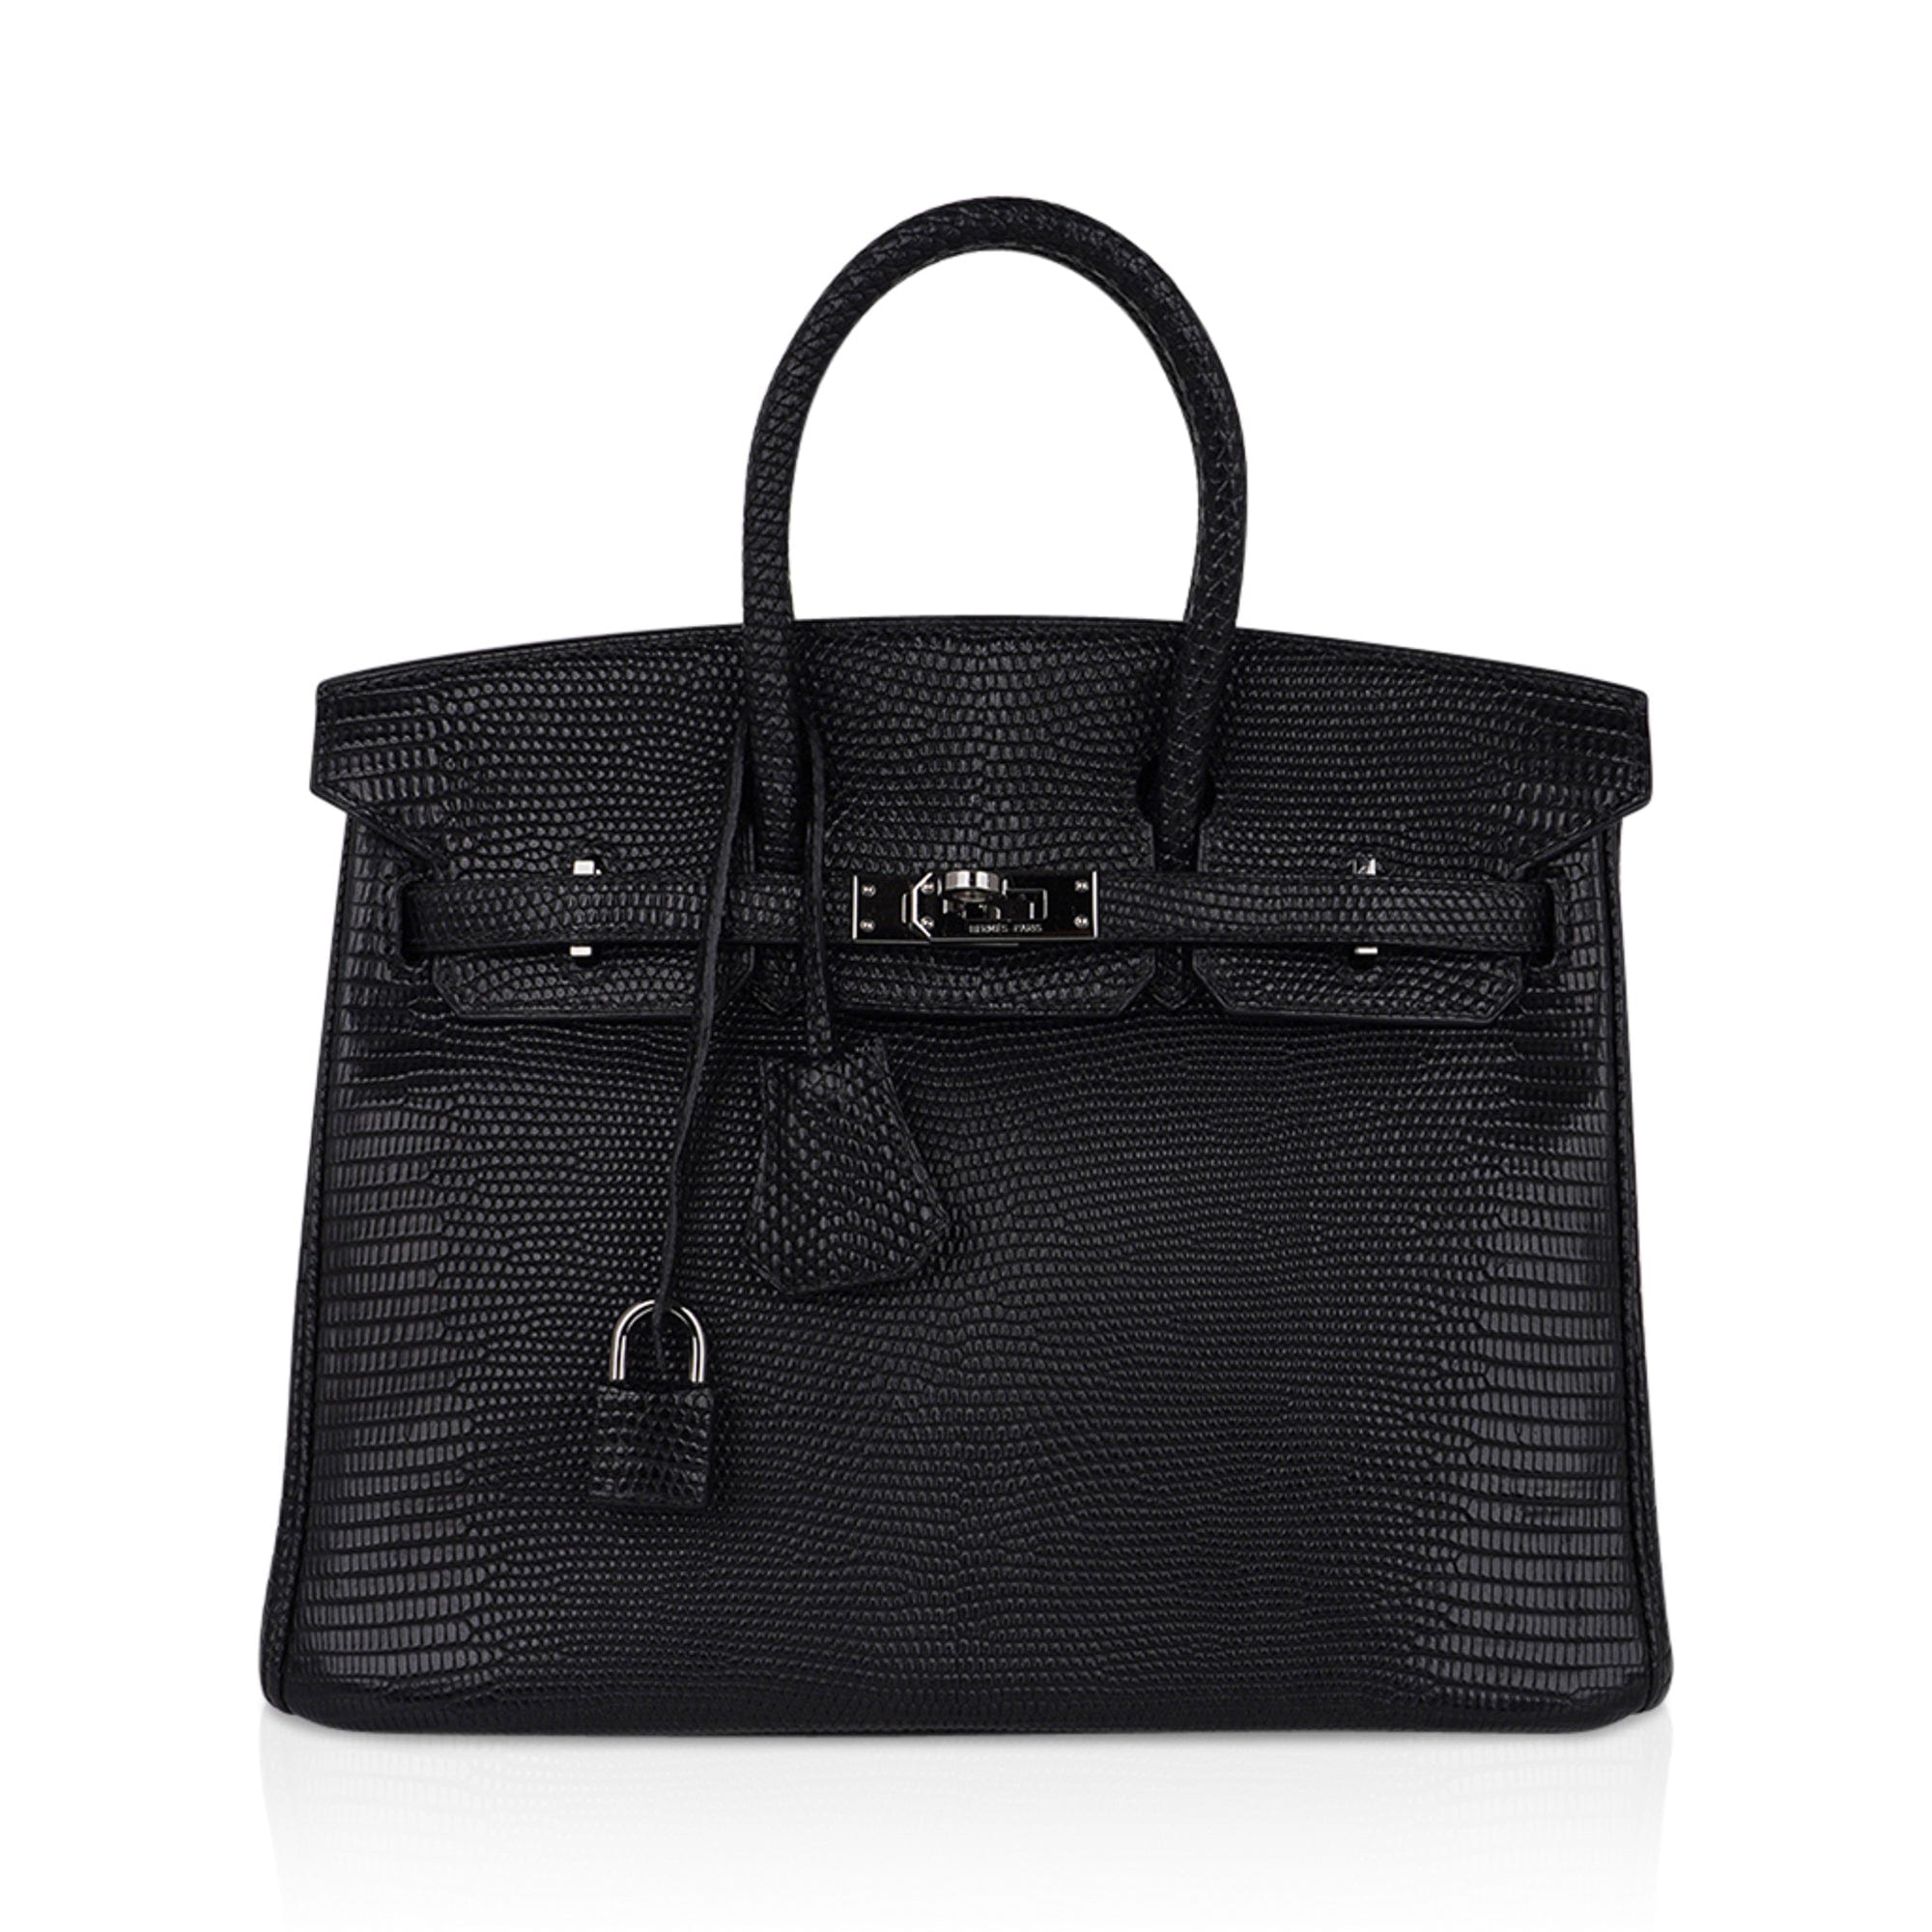 Bags of the Week: Limited Edition Hermès Birkin and Kelly Bags